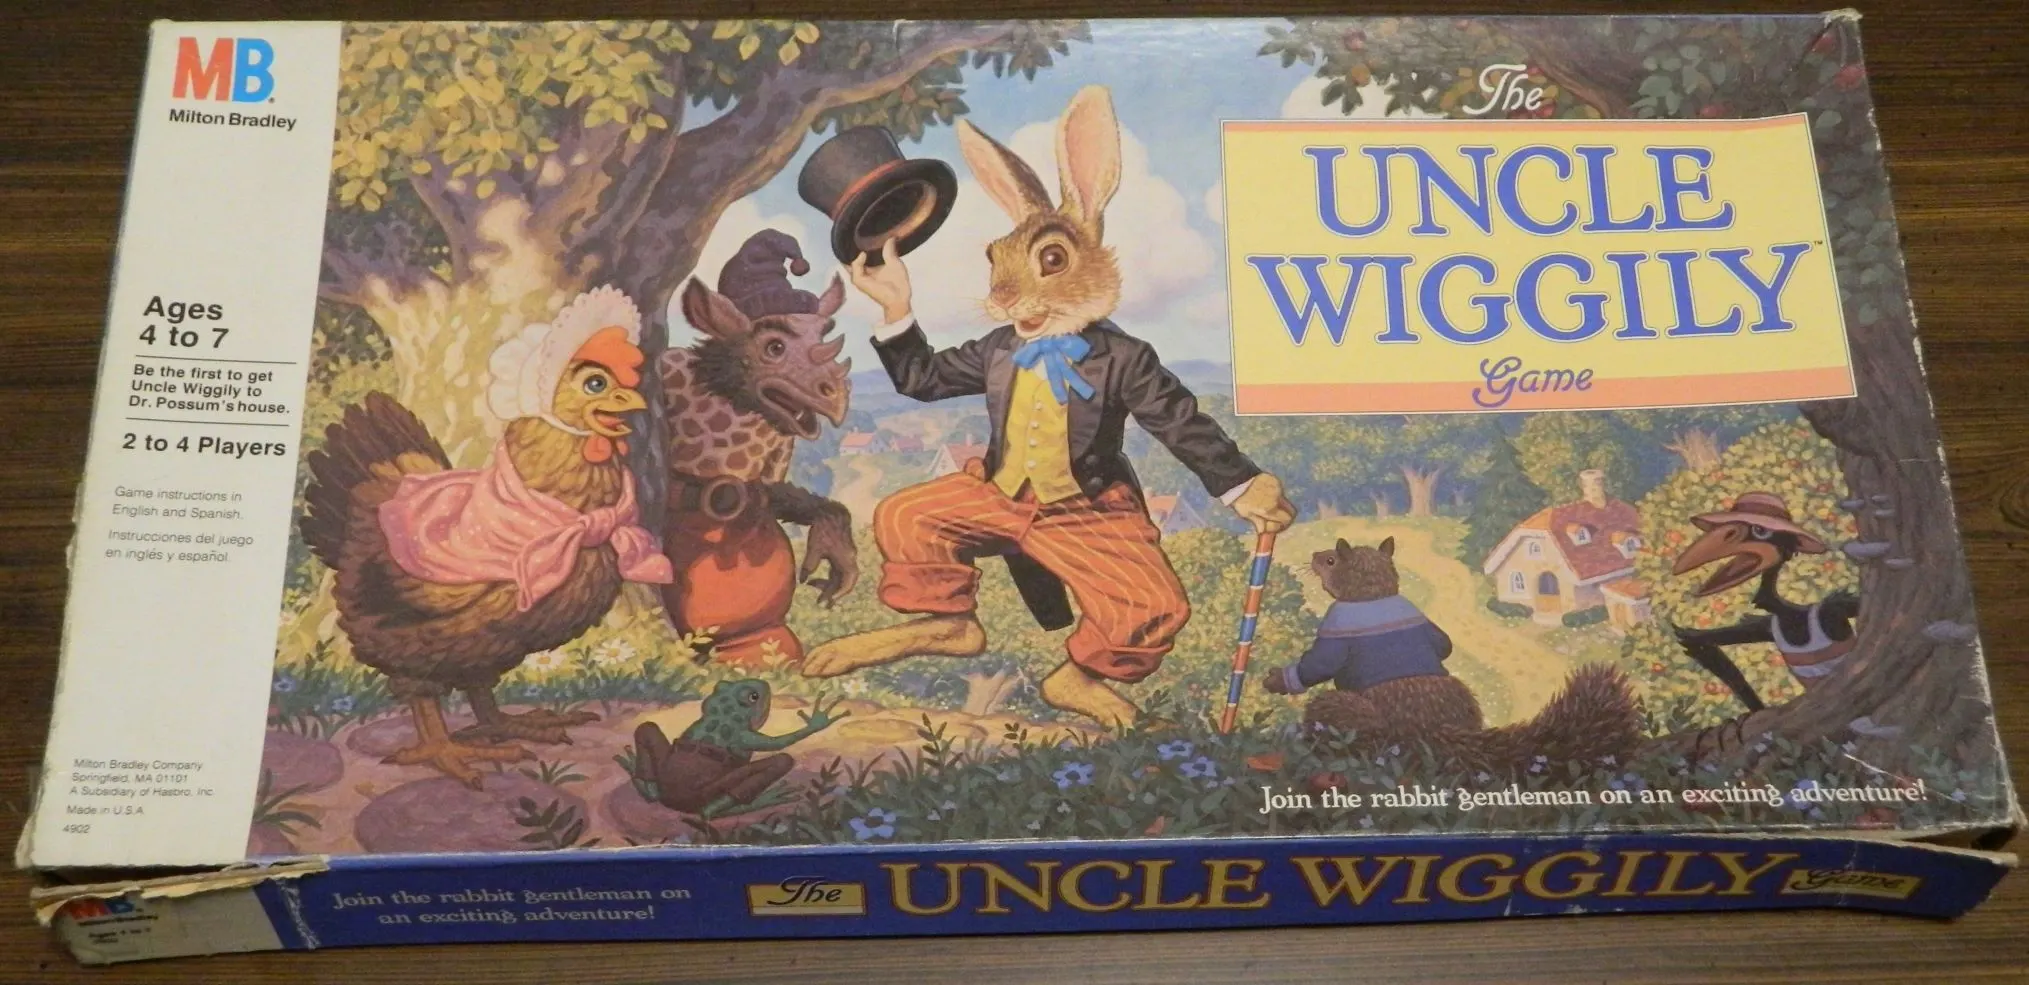 Box for The Uncle Wiggily Game